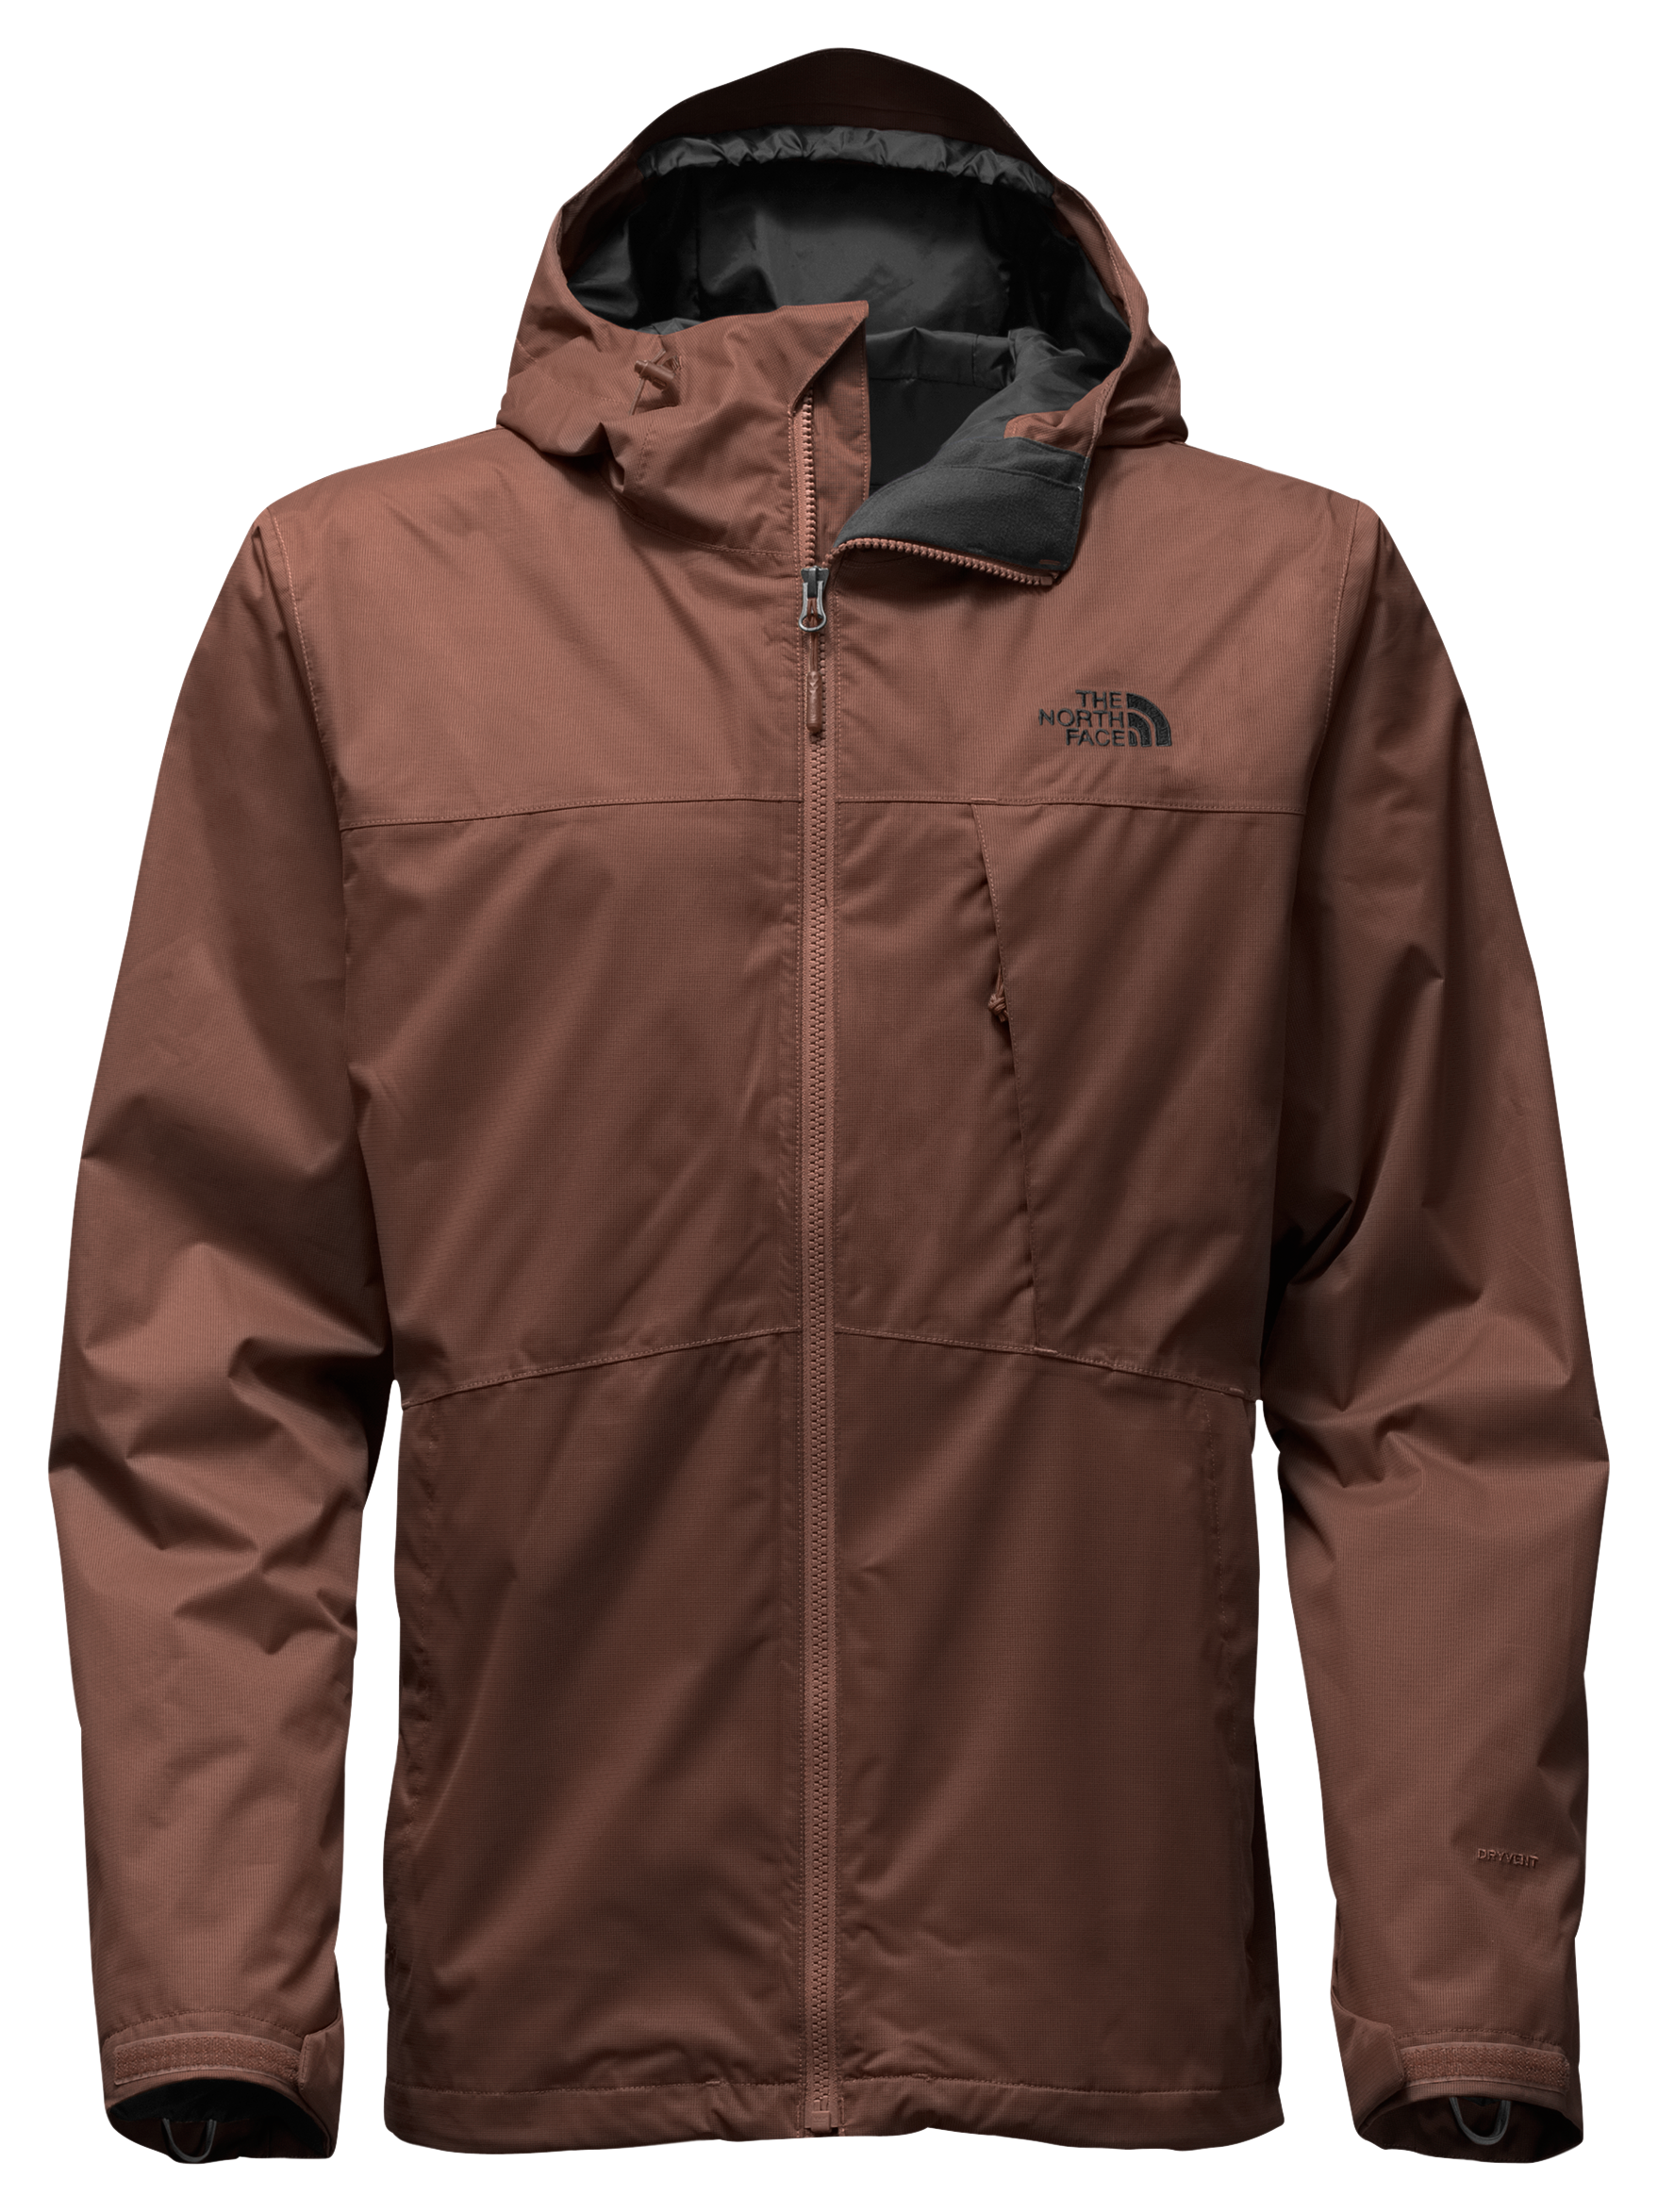 The North Face Arrowood Triclimate Jacket for Men | Bass Pro Shops